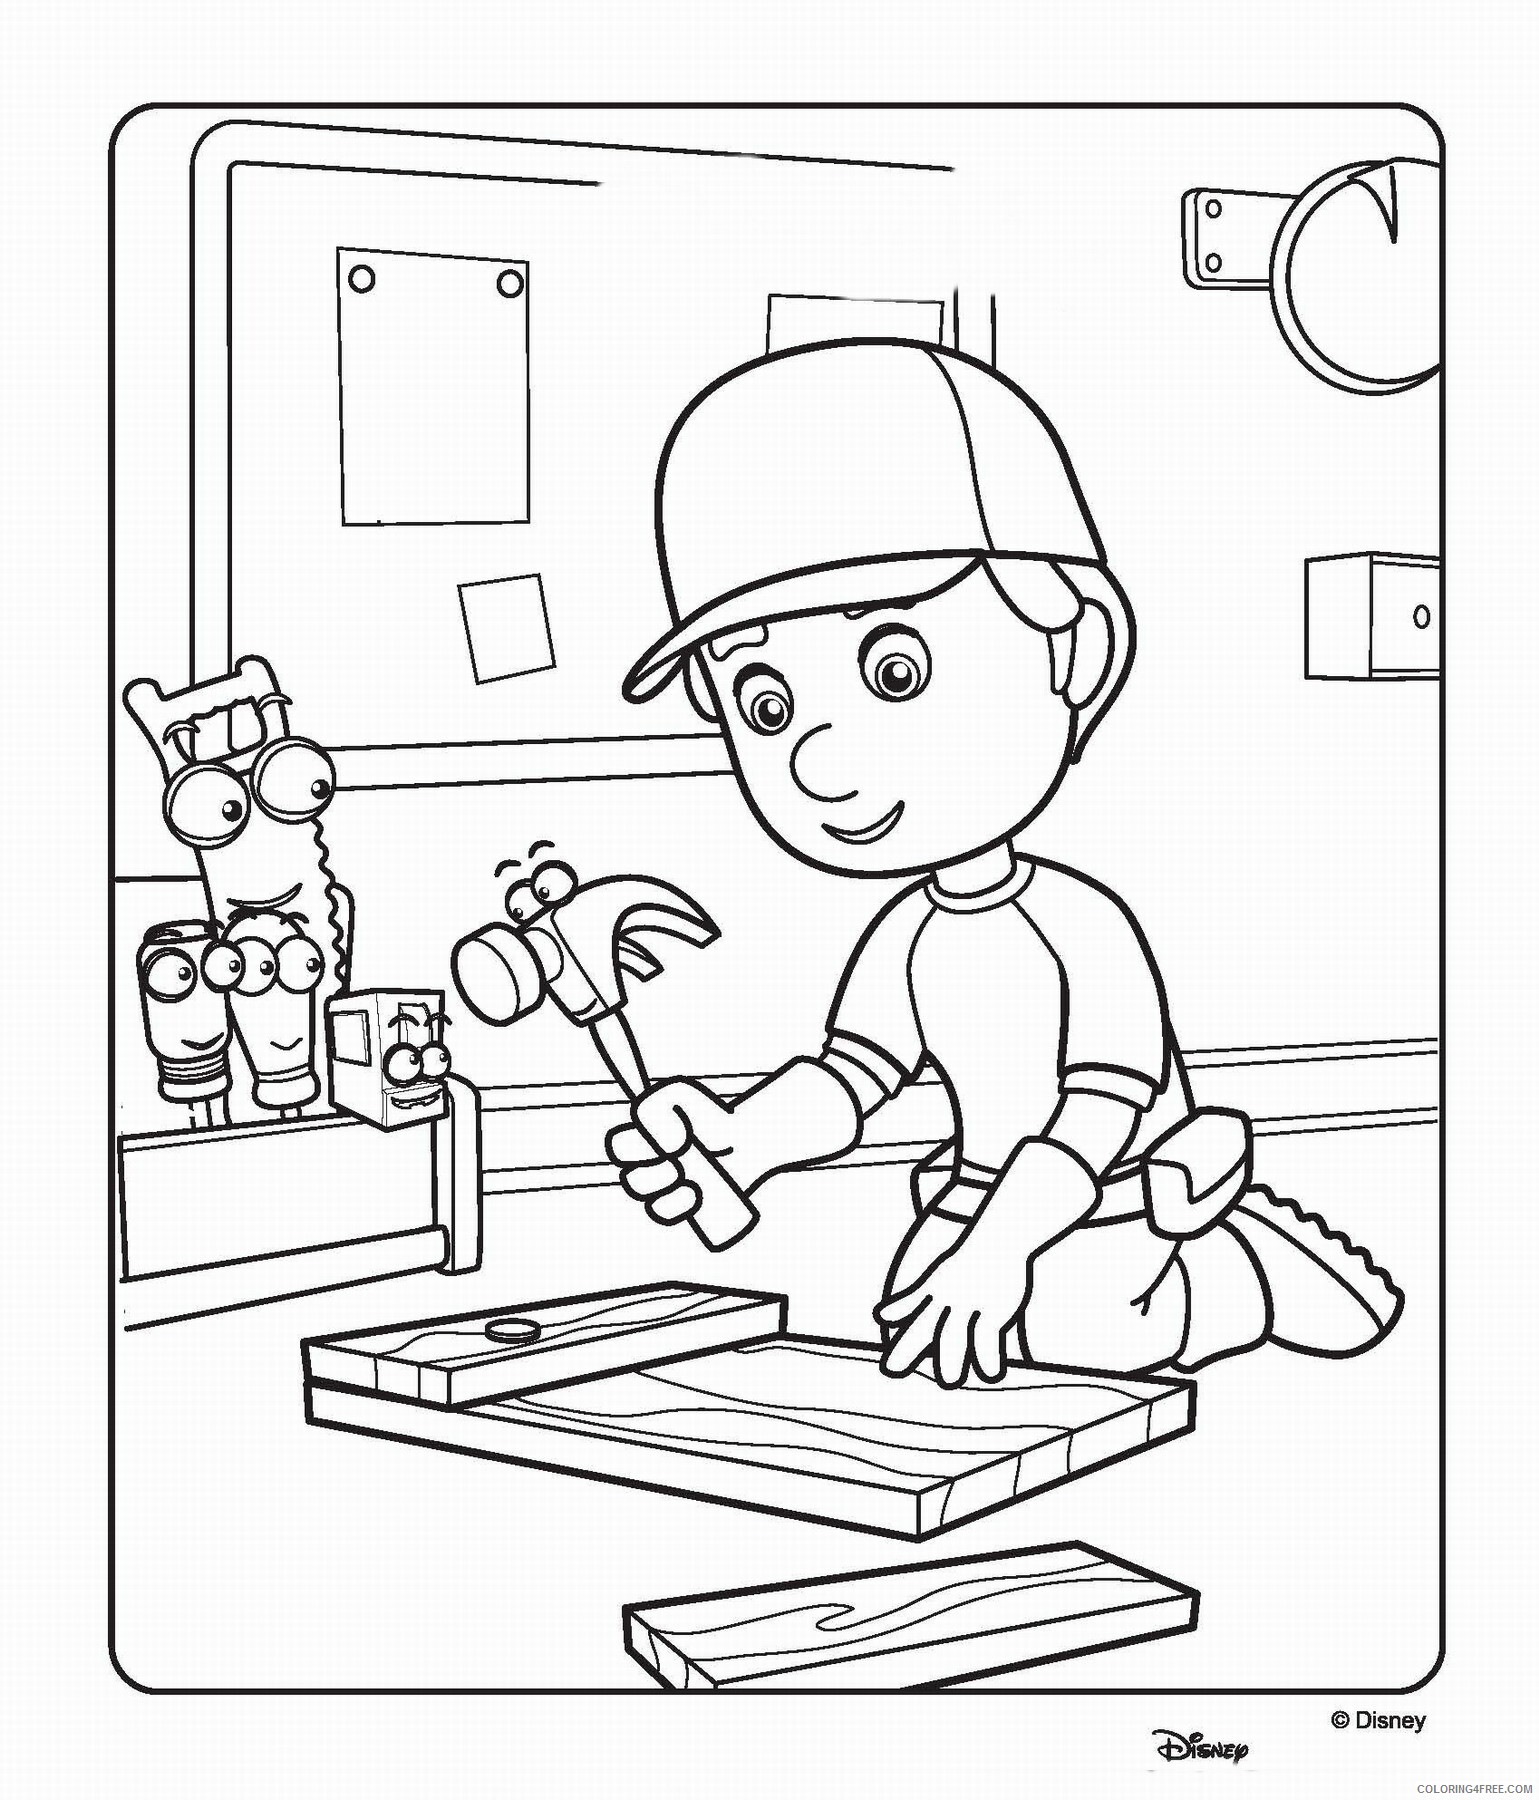 Bob the Builder Coloring Pages TV Film bob the builder_37 Printable 2020 00986 Coloring4free